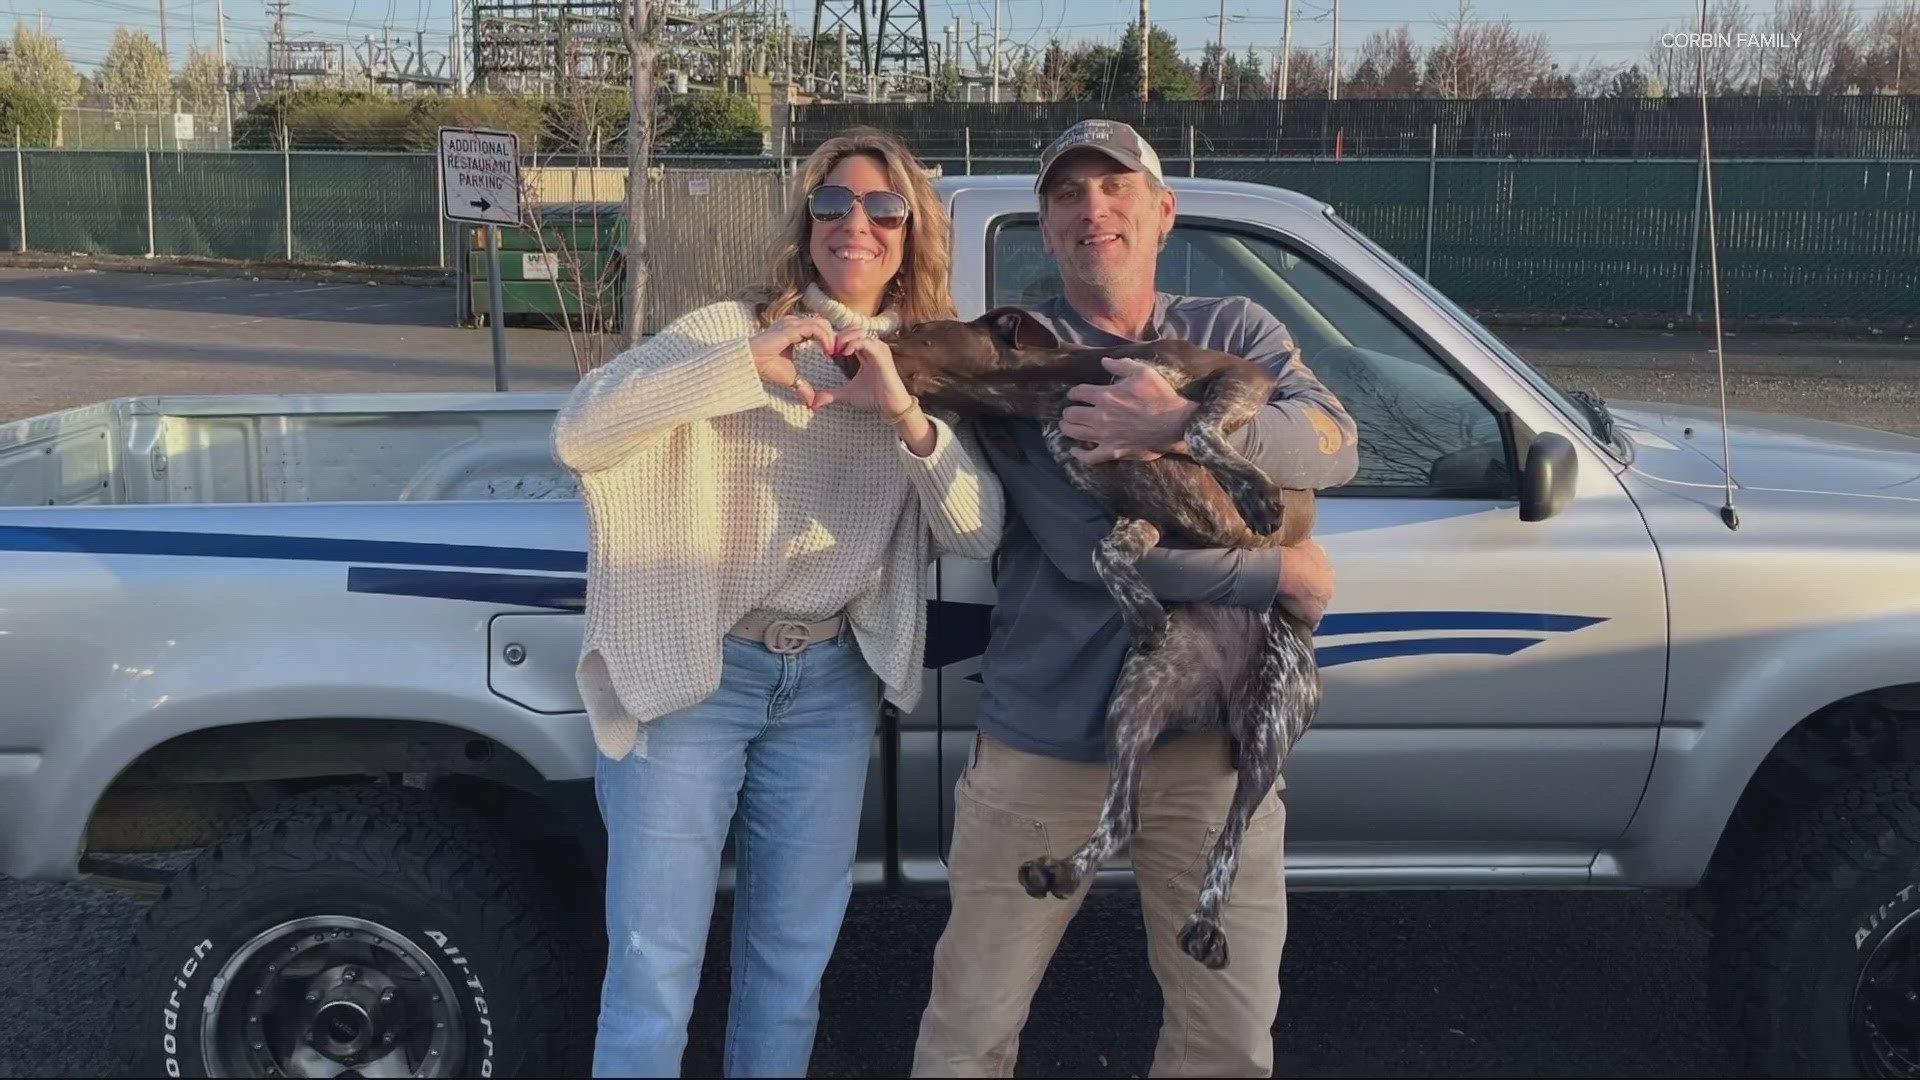 The pickup truck was stolen earlier this week with dog, Ida, inside. Both were located in Gresham on Friday after thousands shared the story on social media.